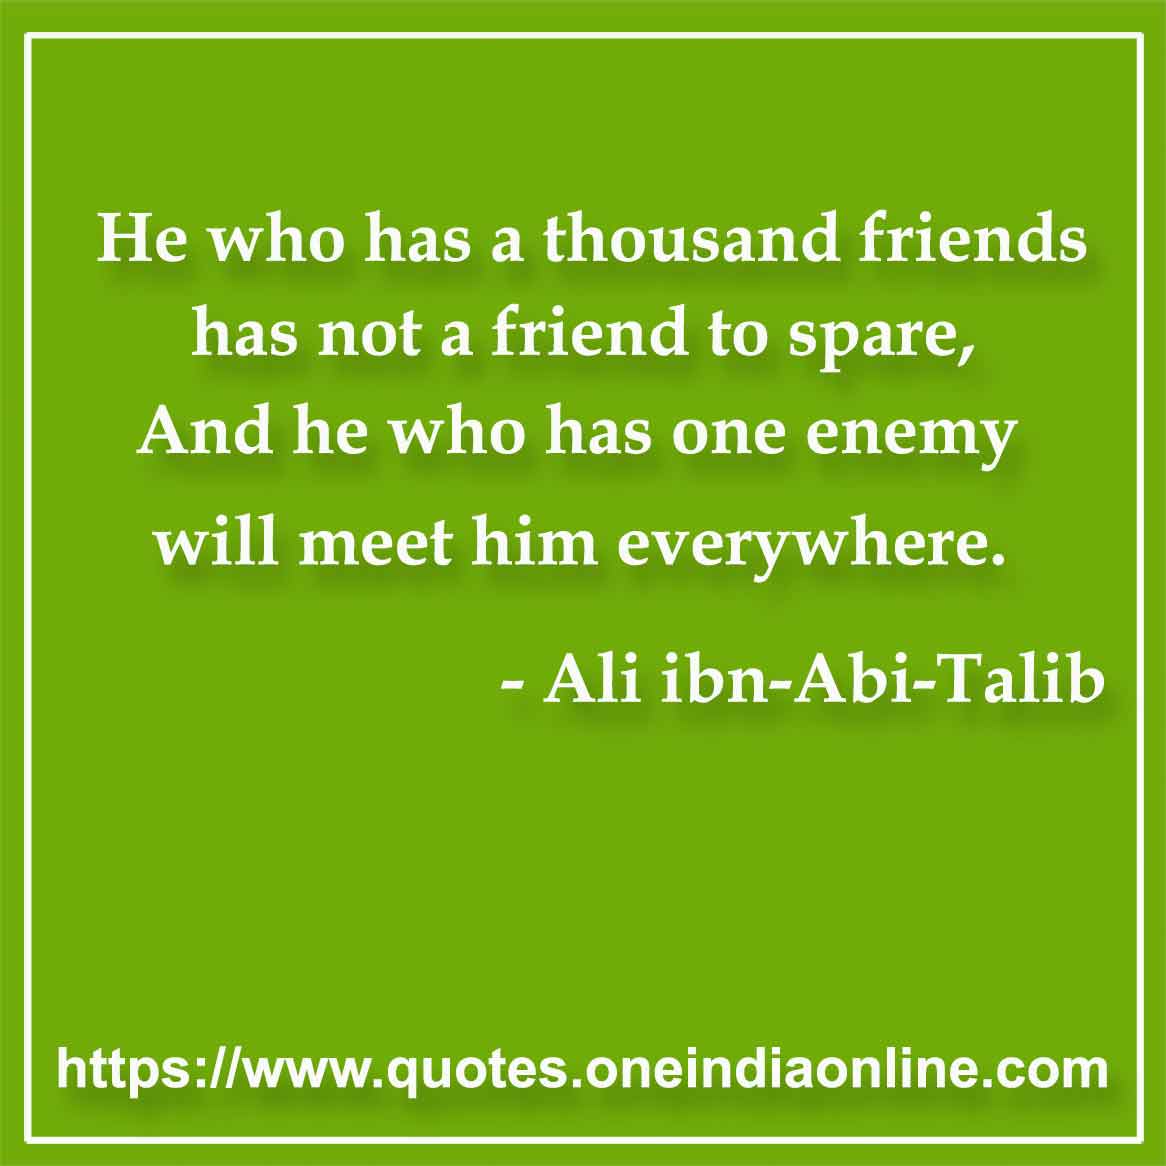 He who has a thousand friends has not a friend to spare, And he who has one enemy will meet him everywhere.

- Enemy Quotes by Ali ibn-Abi-Talib